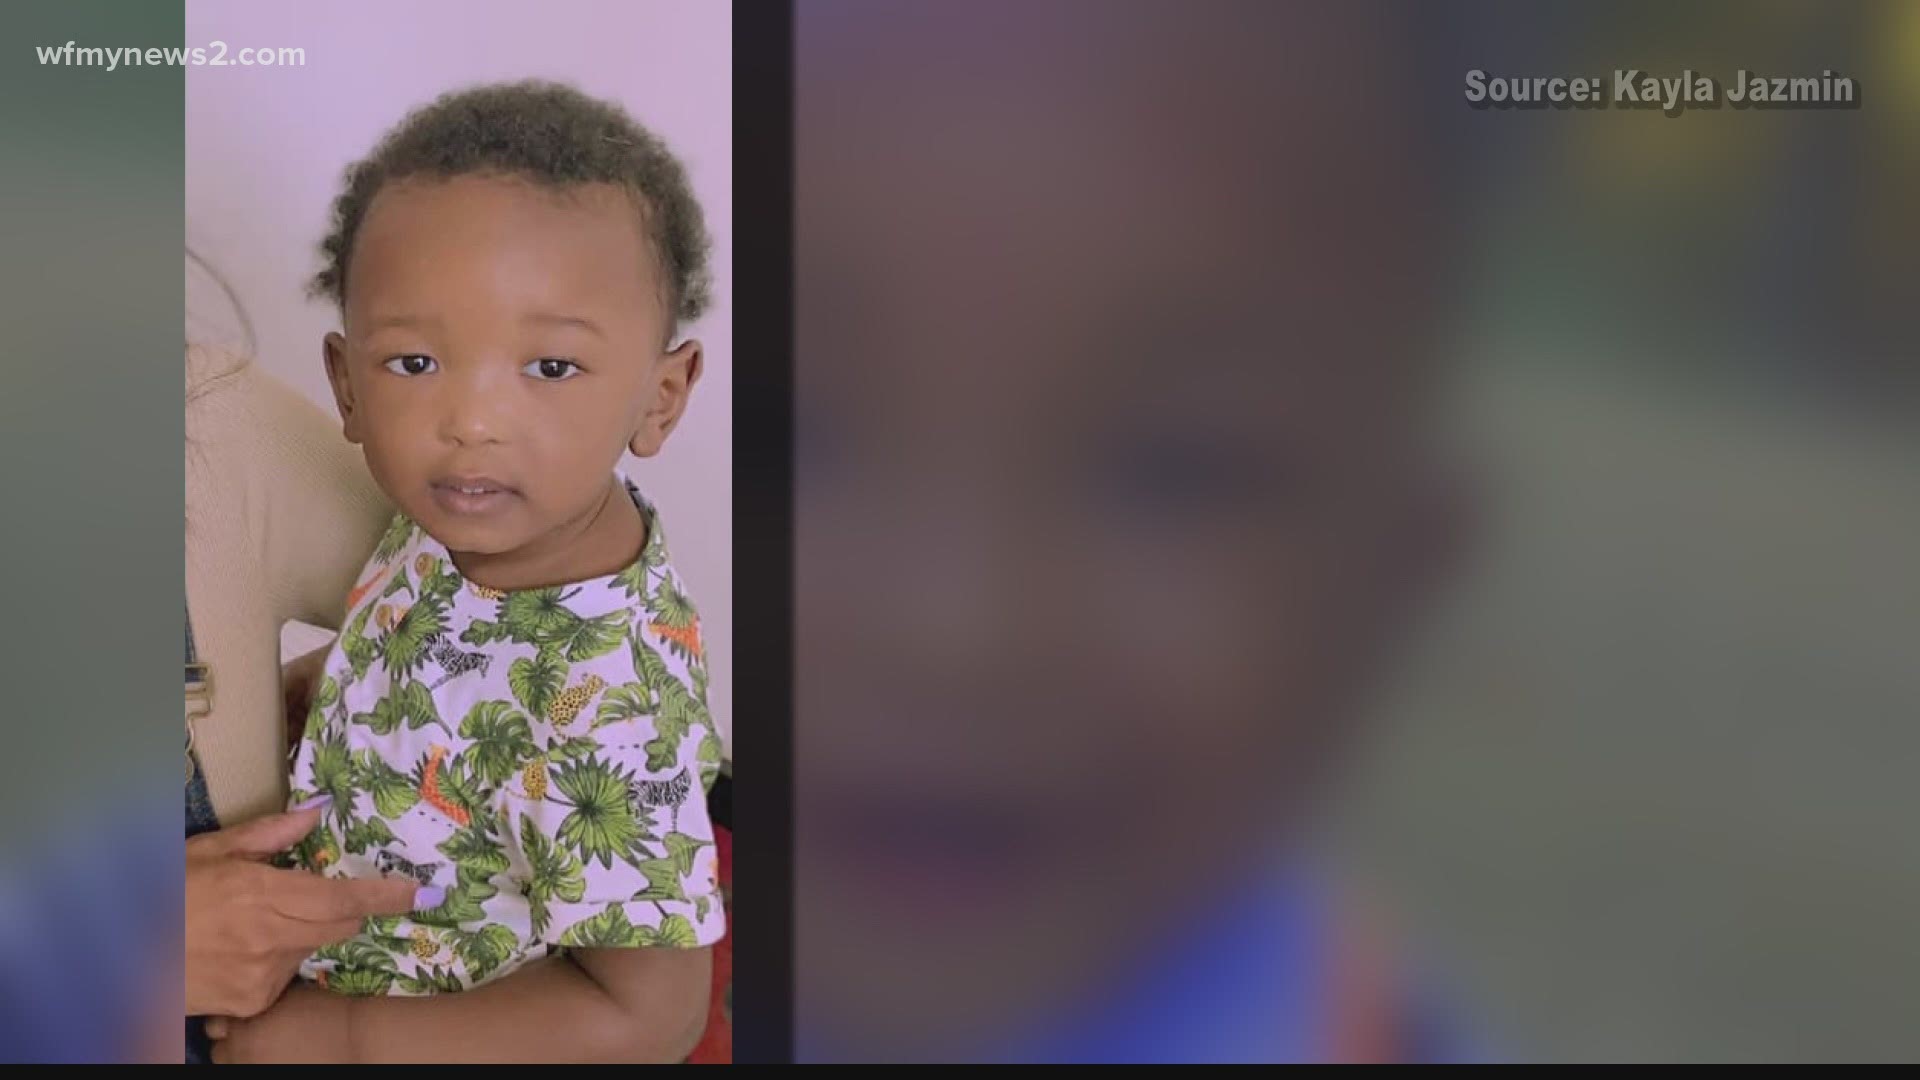 The child was taken when two men stole a car from a Greensboro gas station over the weekend. He was in the back seat. Now, the baby is back home with his mom.